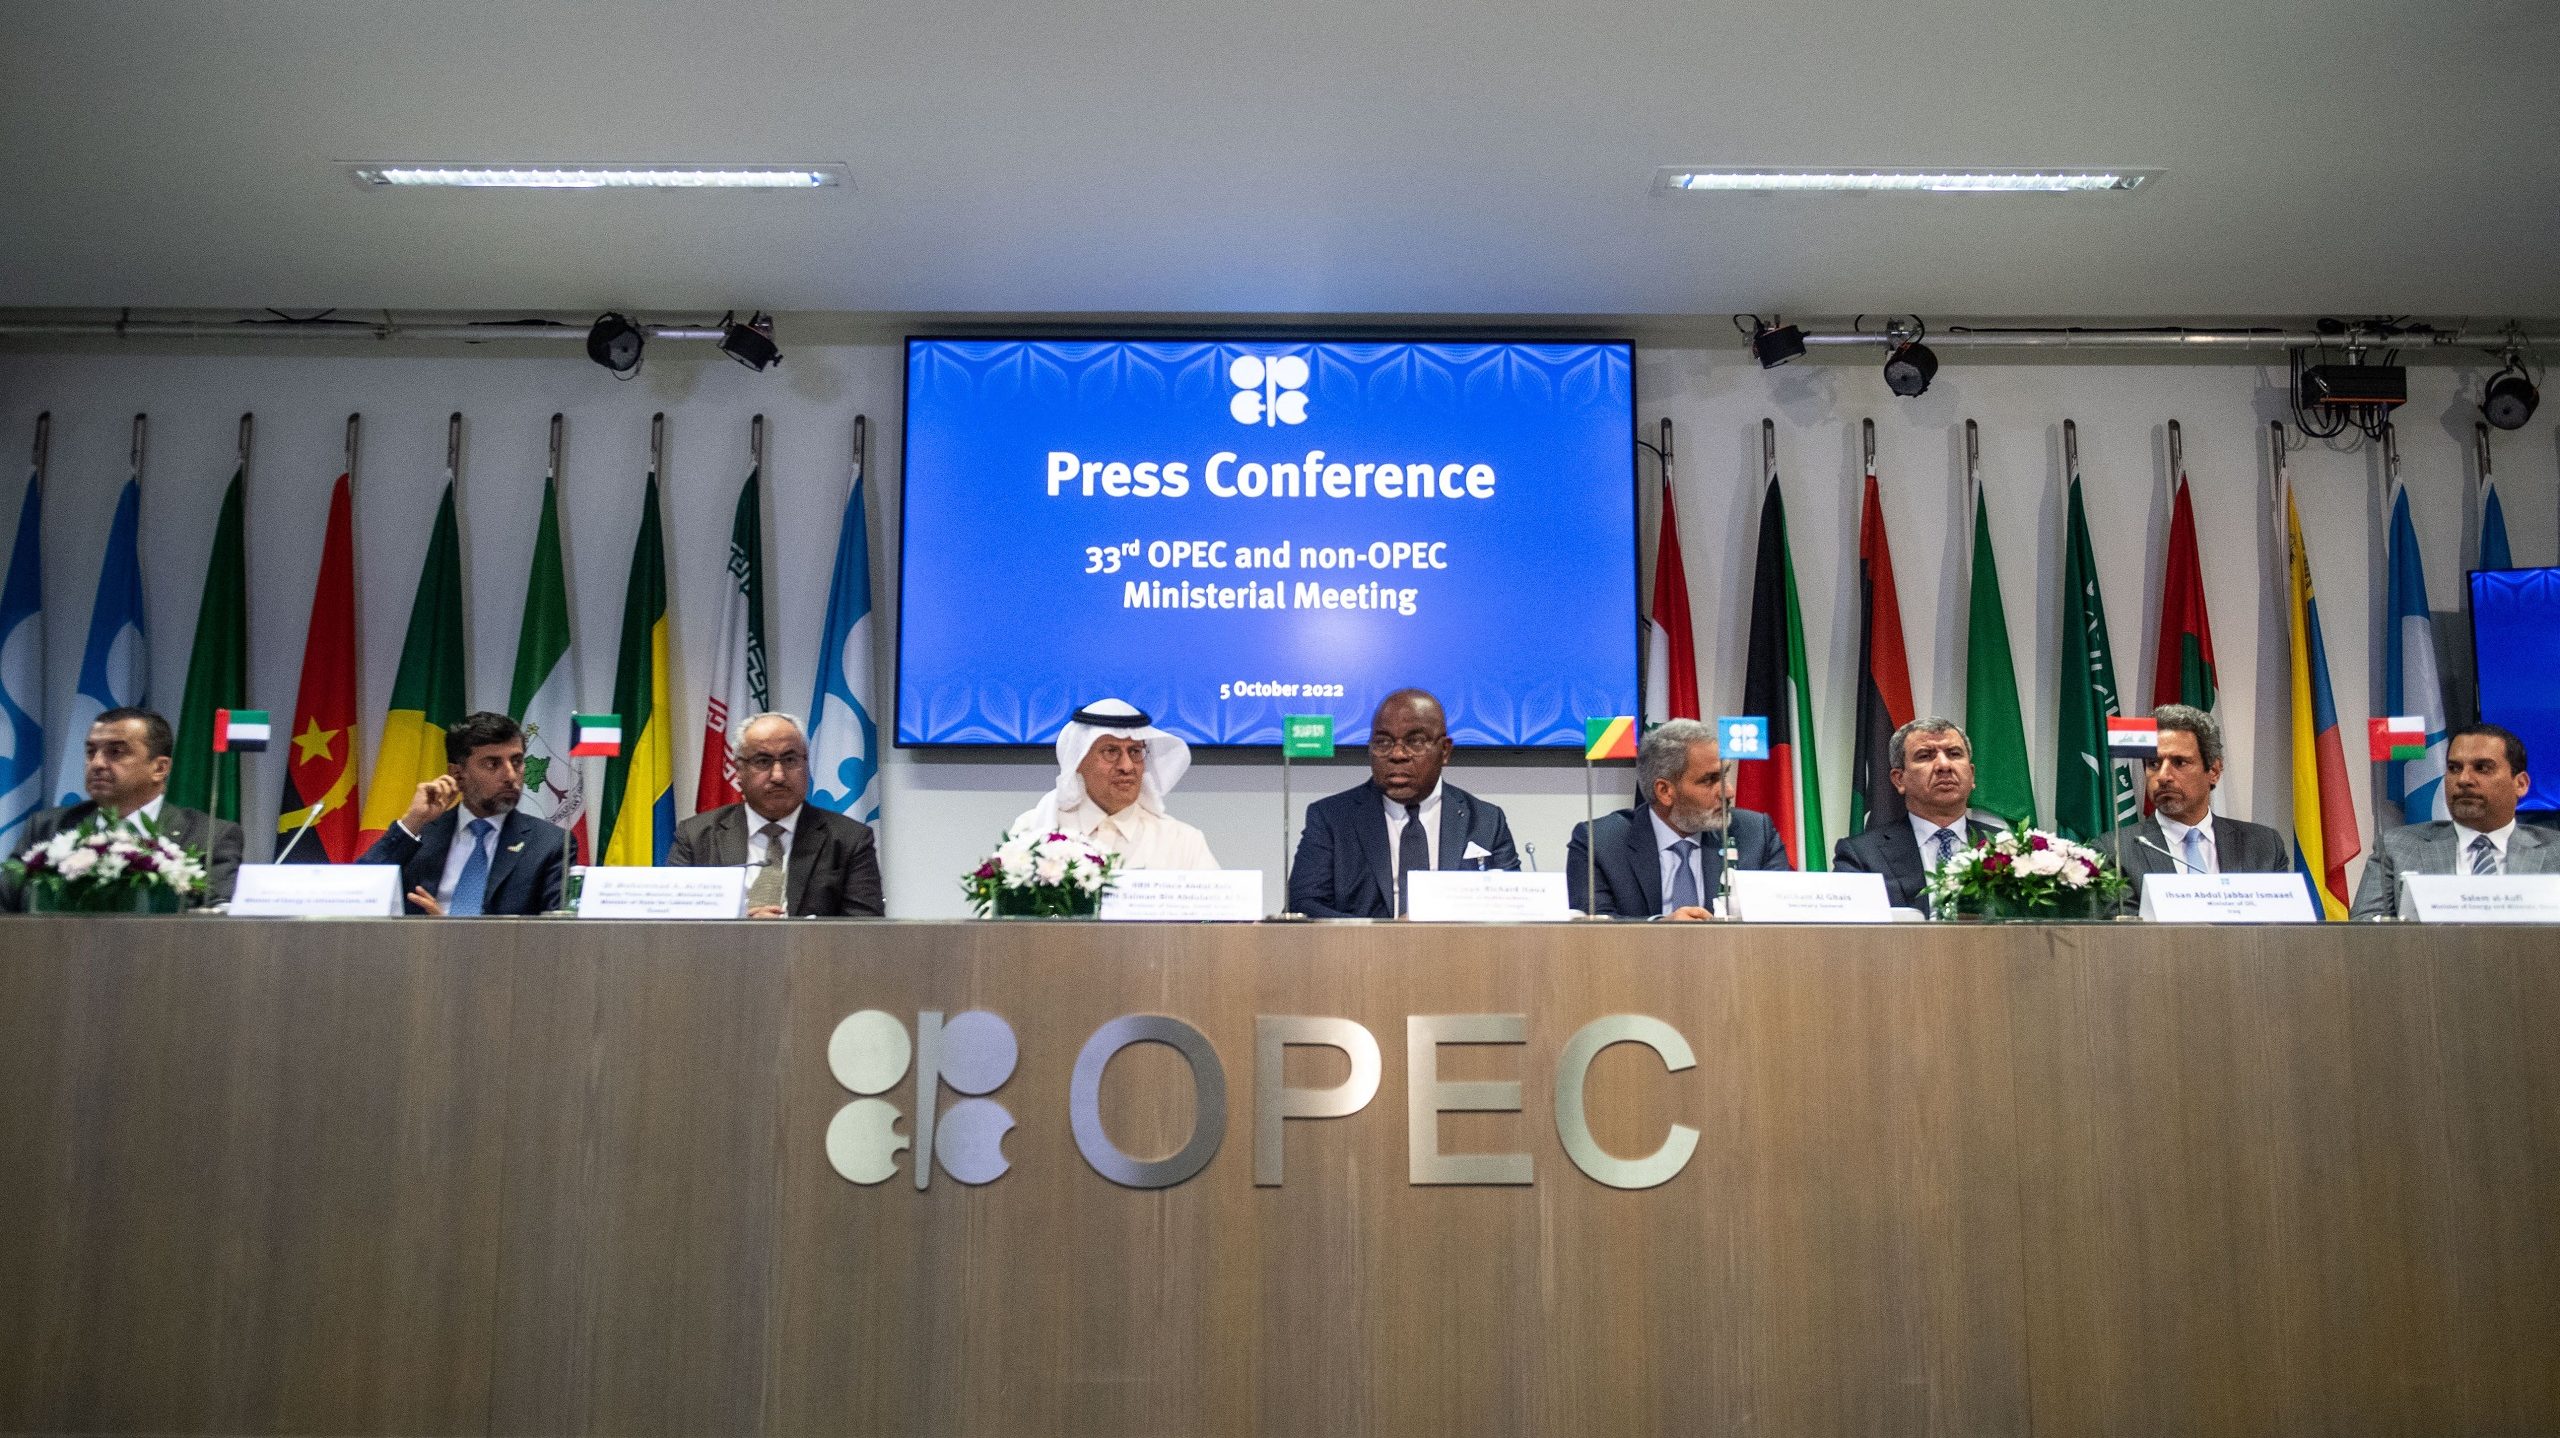 As OPEC+ Cuts Oil Production, Saudi Alliances May Shift From Washington to Moscow